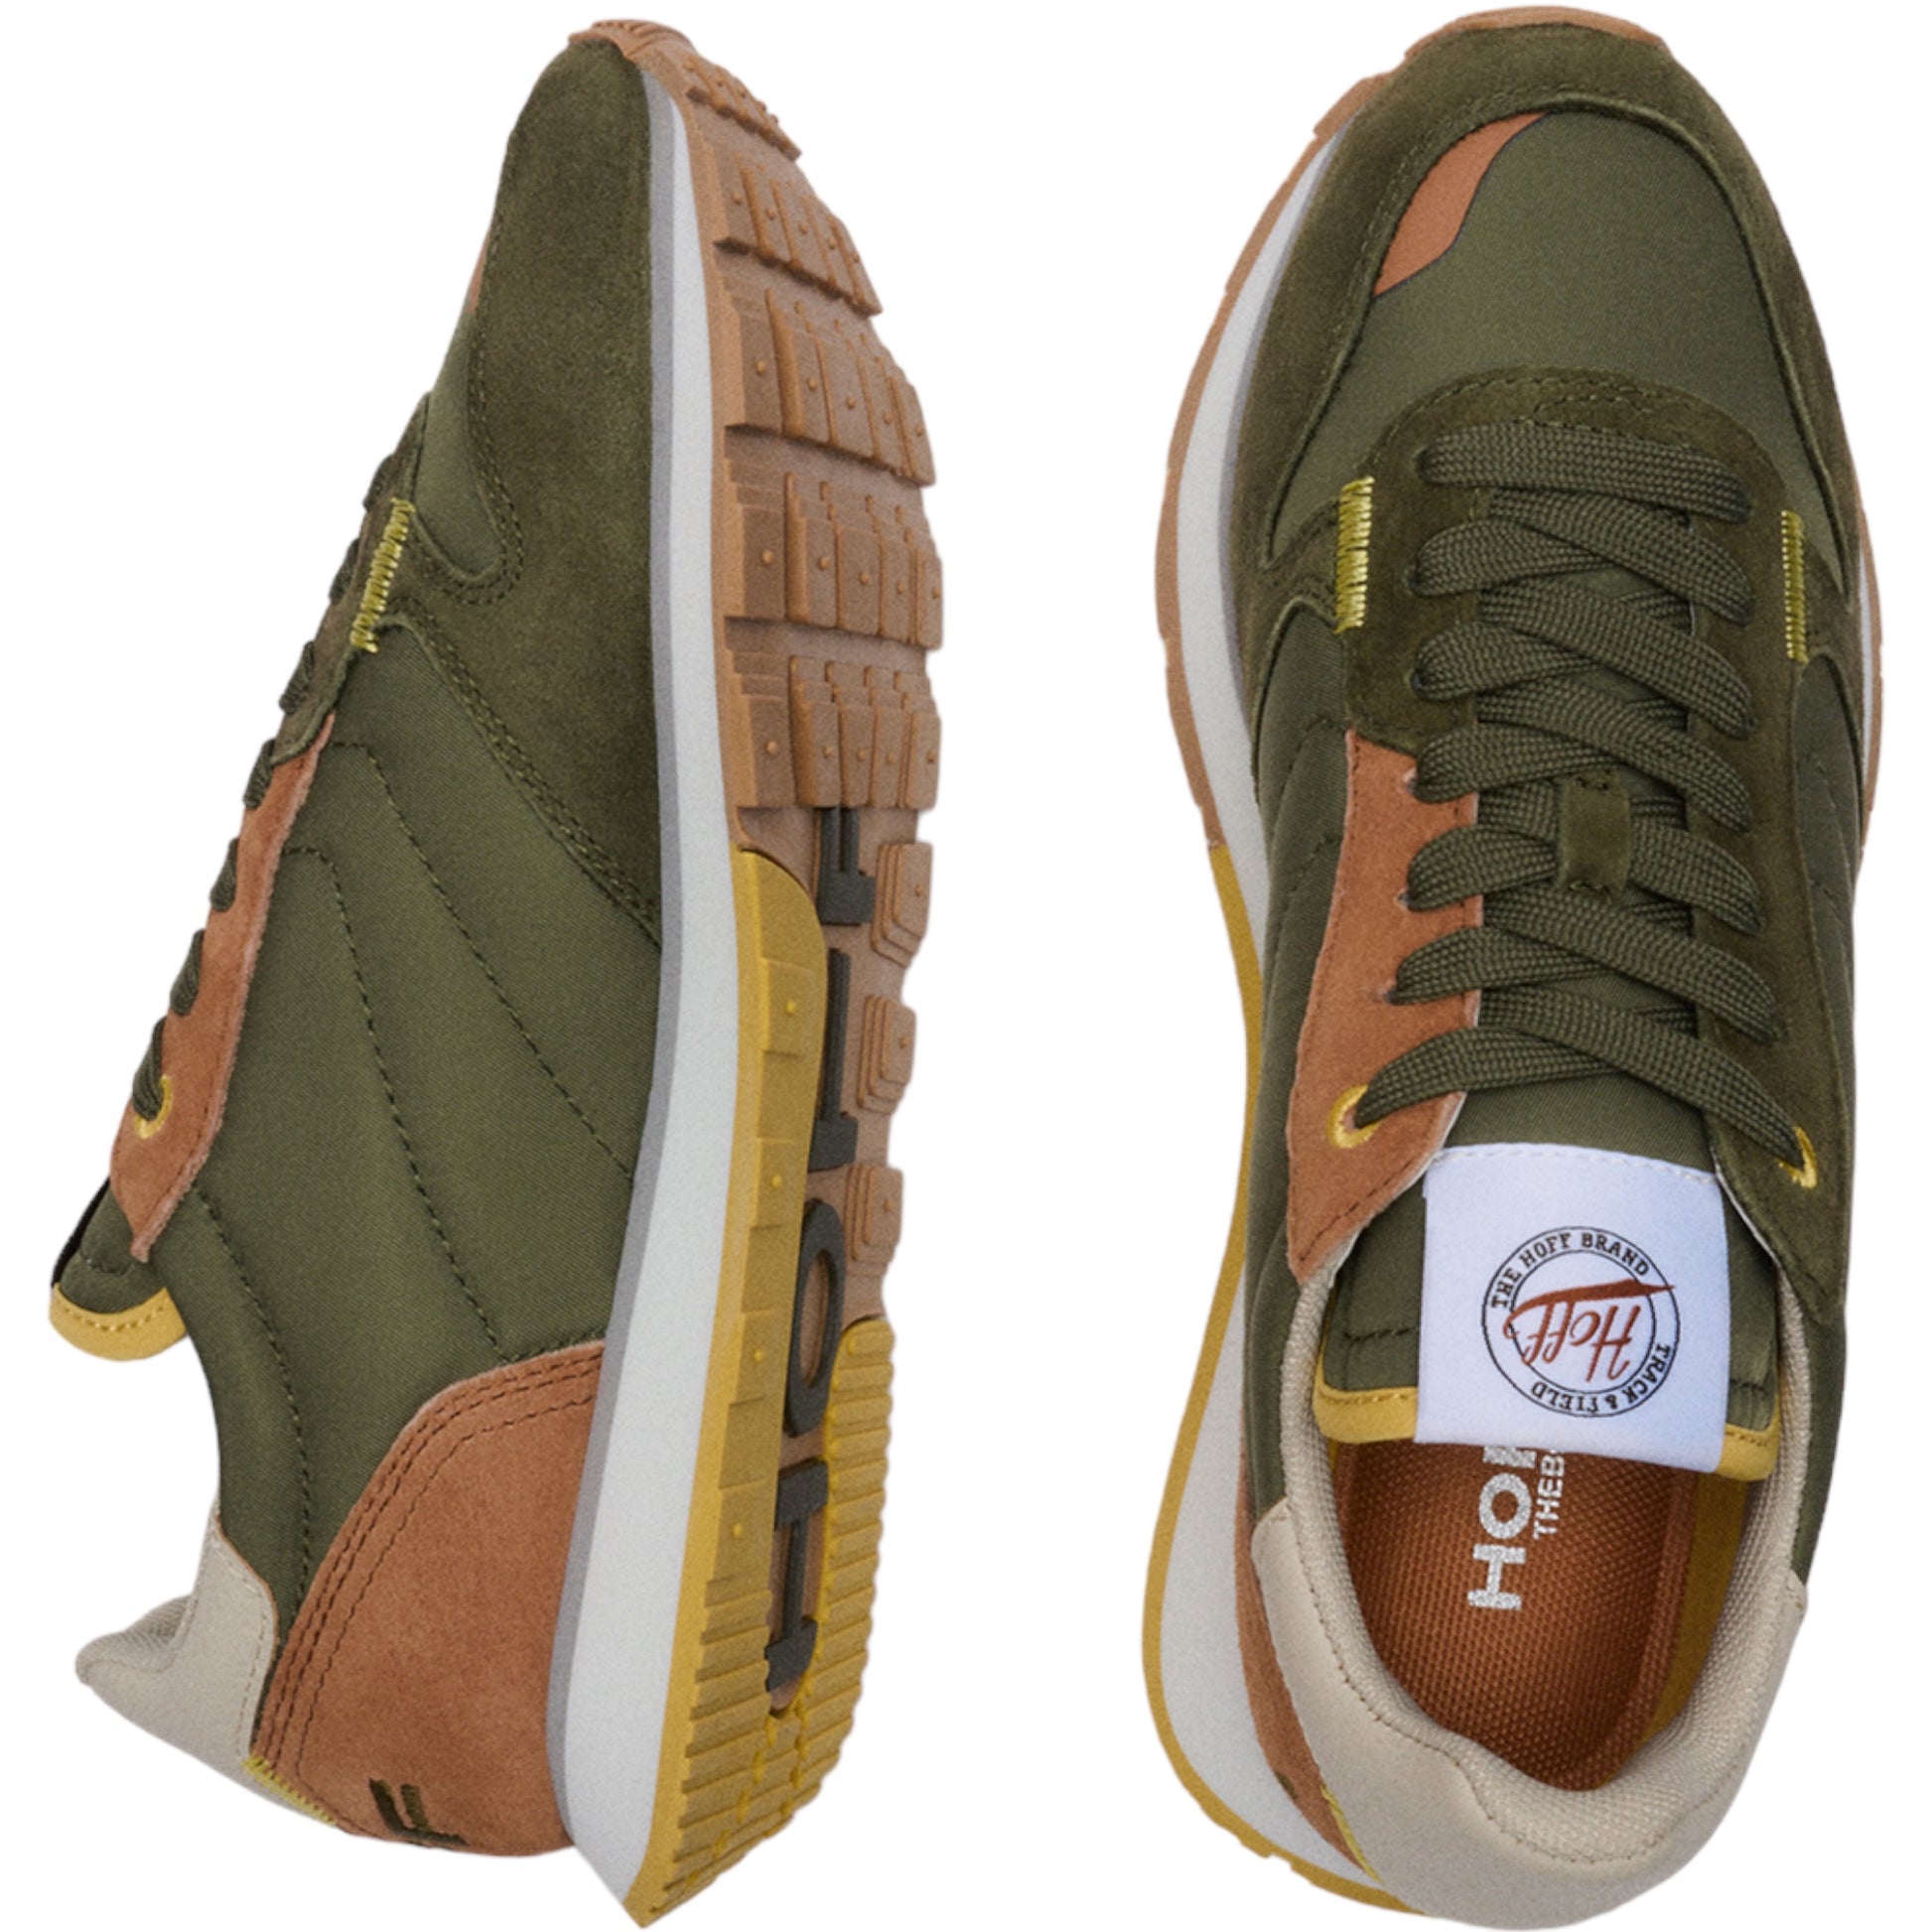 Conker Boutique Hoff Thebes Khaki Trainers showing inside and top view